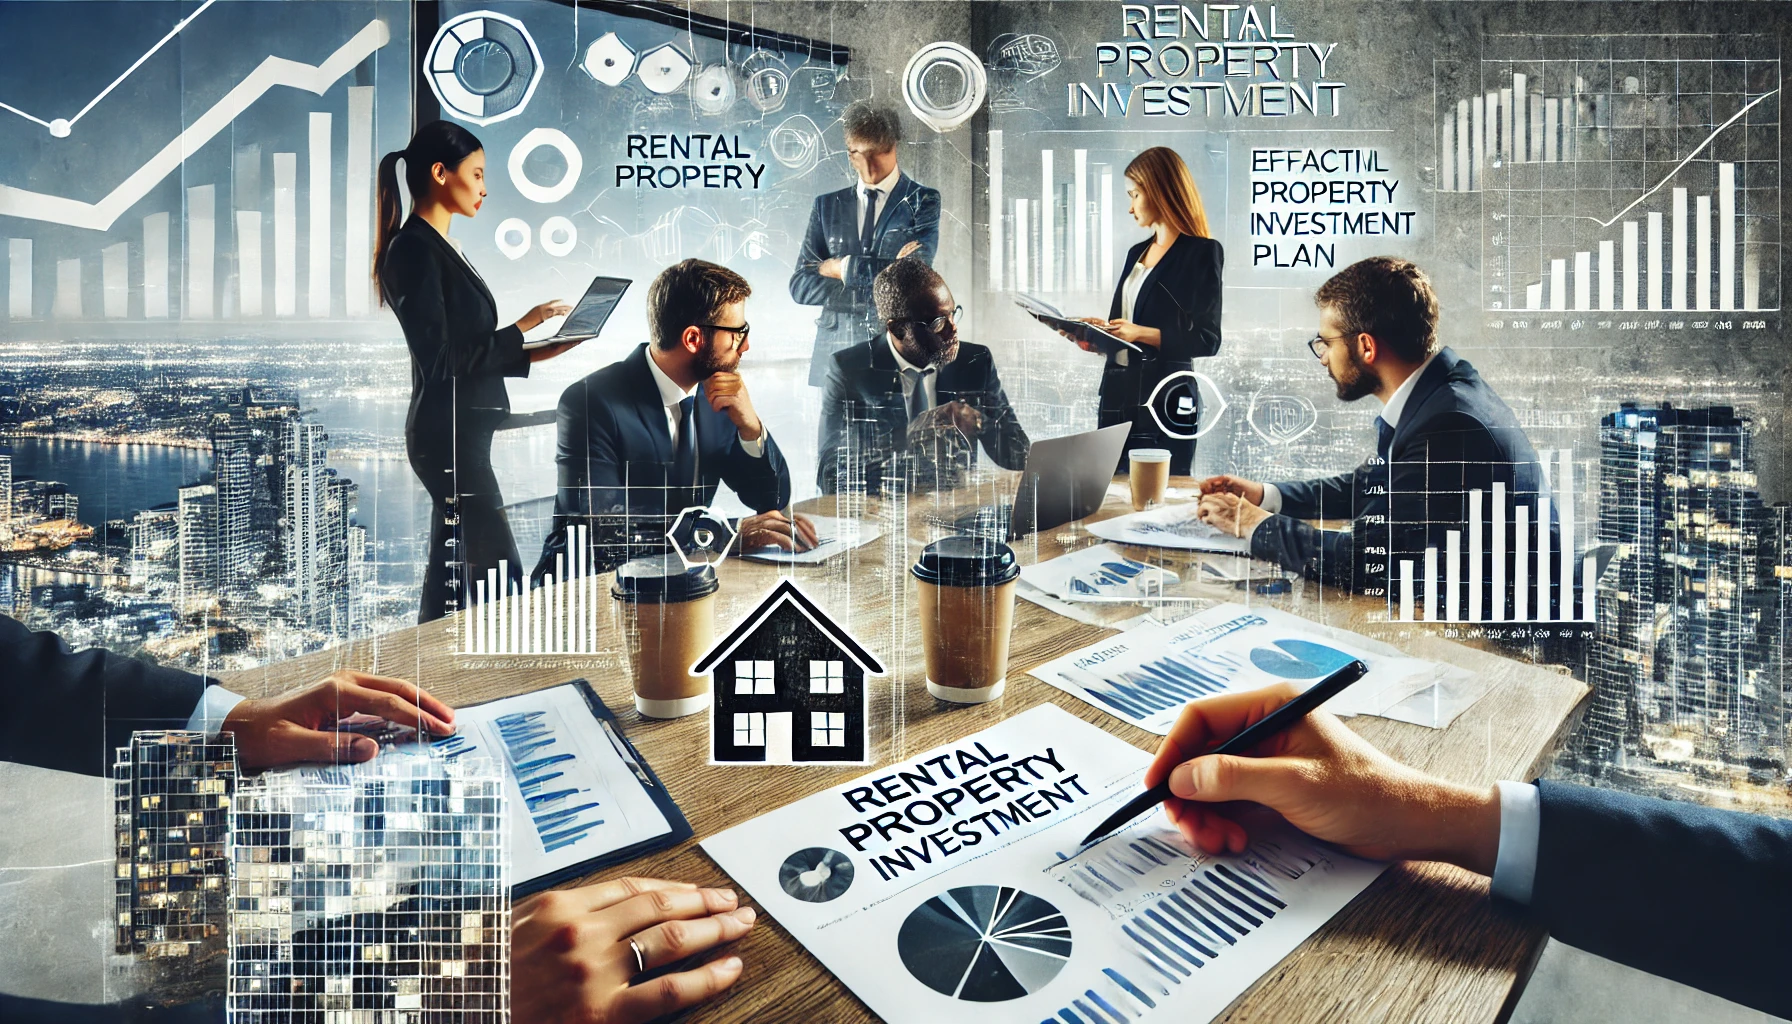 Creating an Effective Rental Property Investment Plan